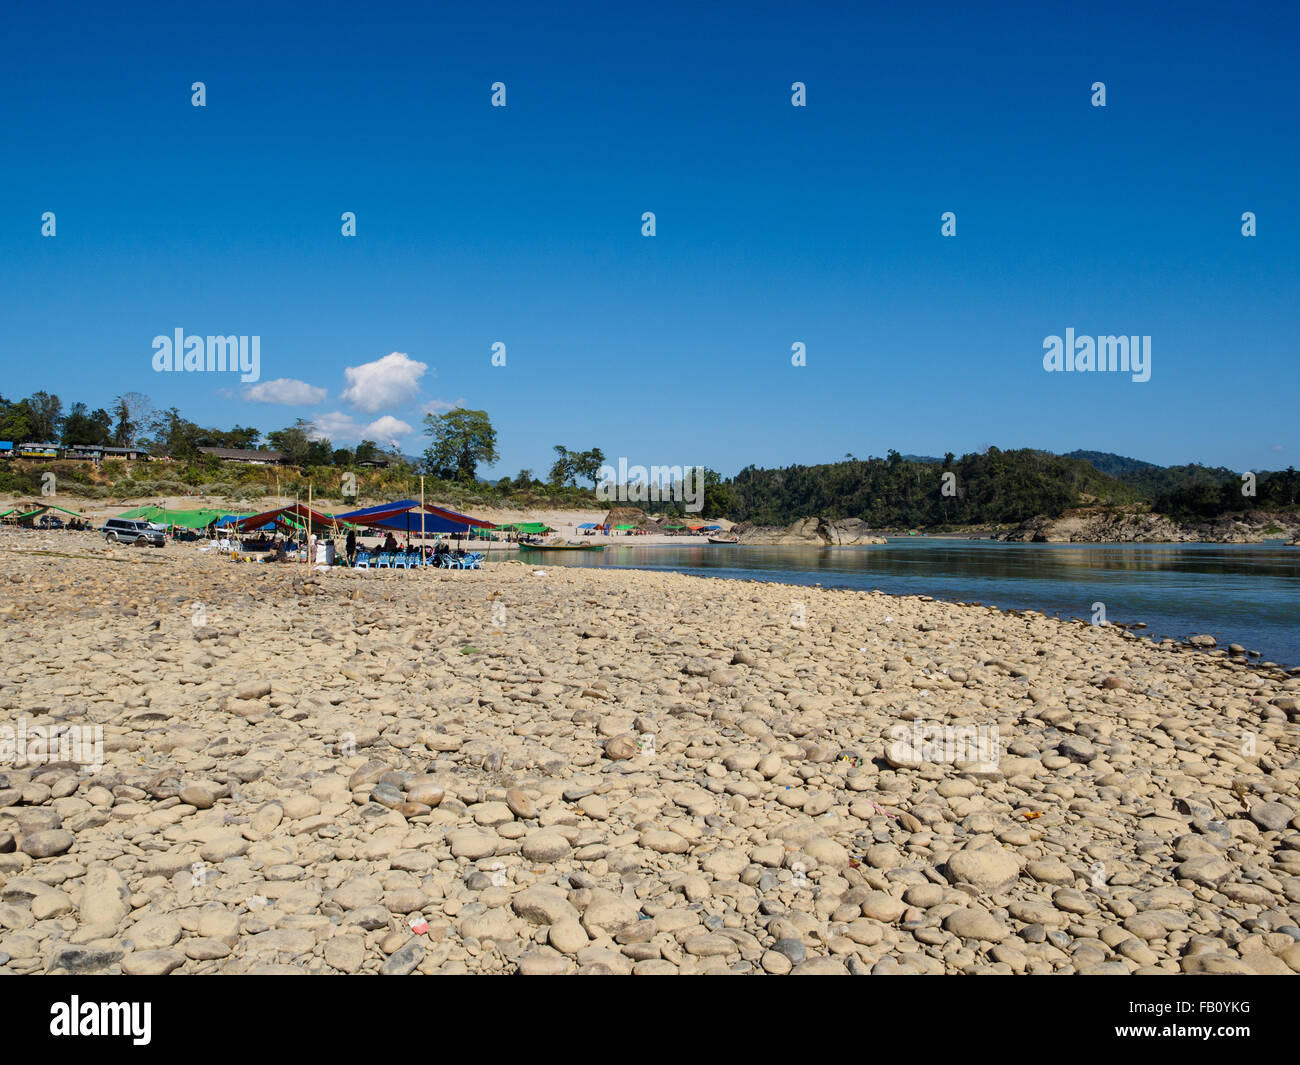 View at Myitsone, the confluence of N'mai and Mali rivers. Stock Photo